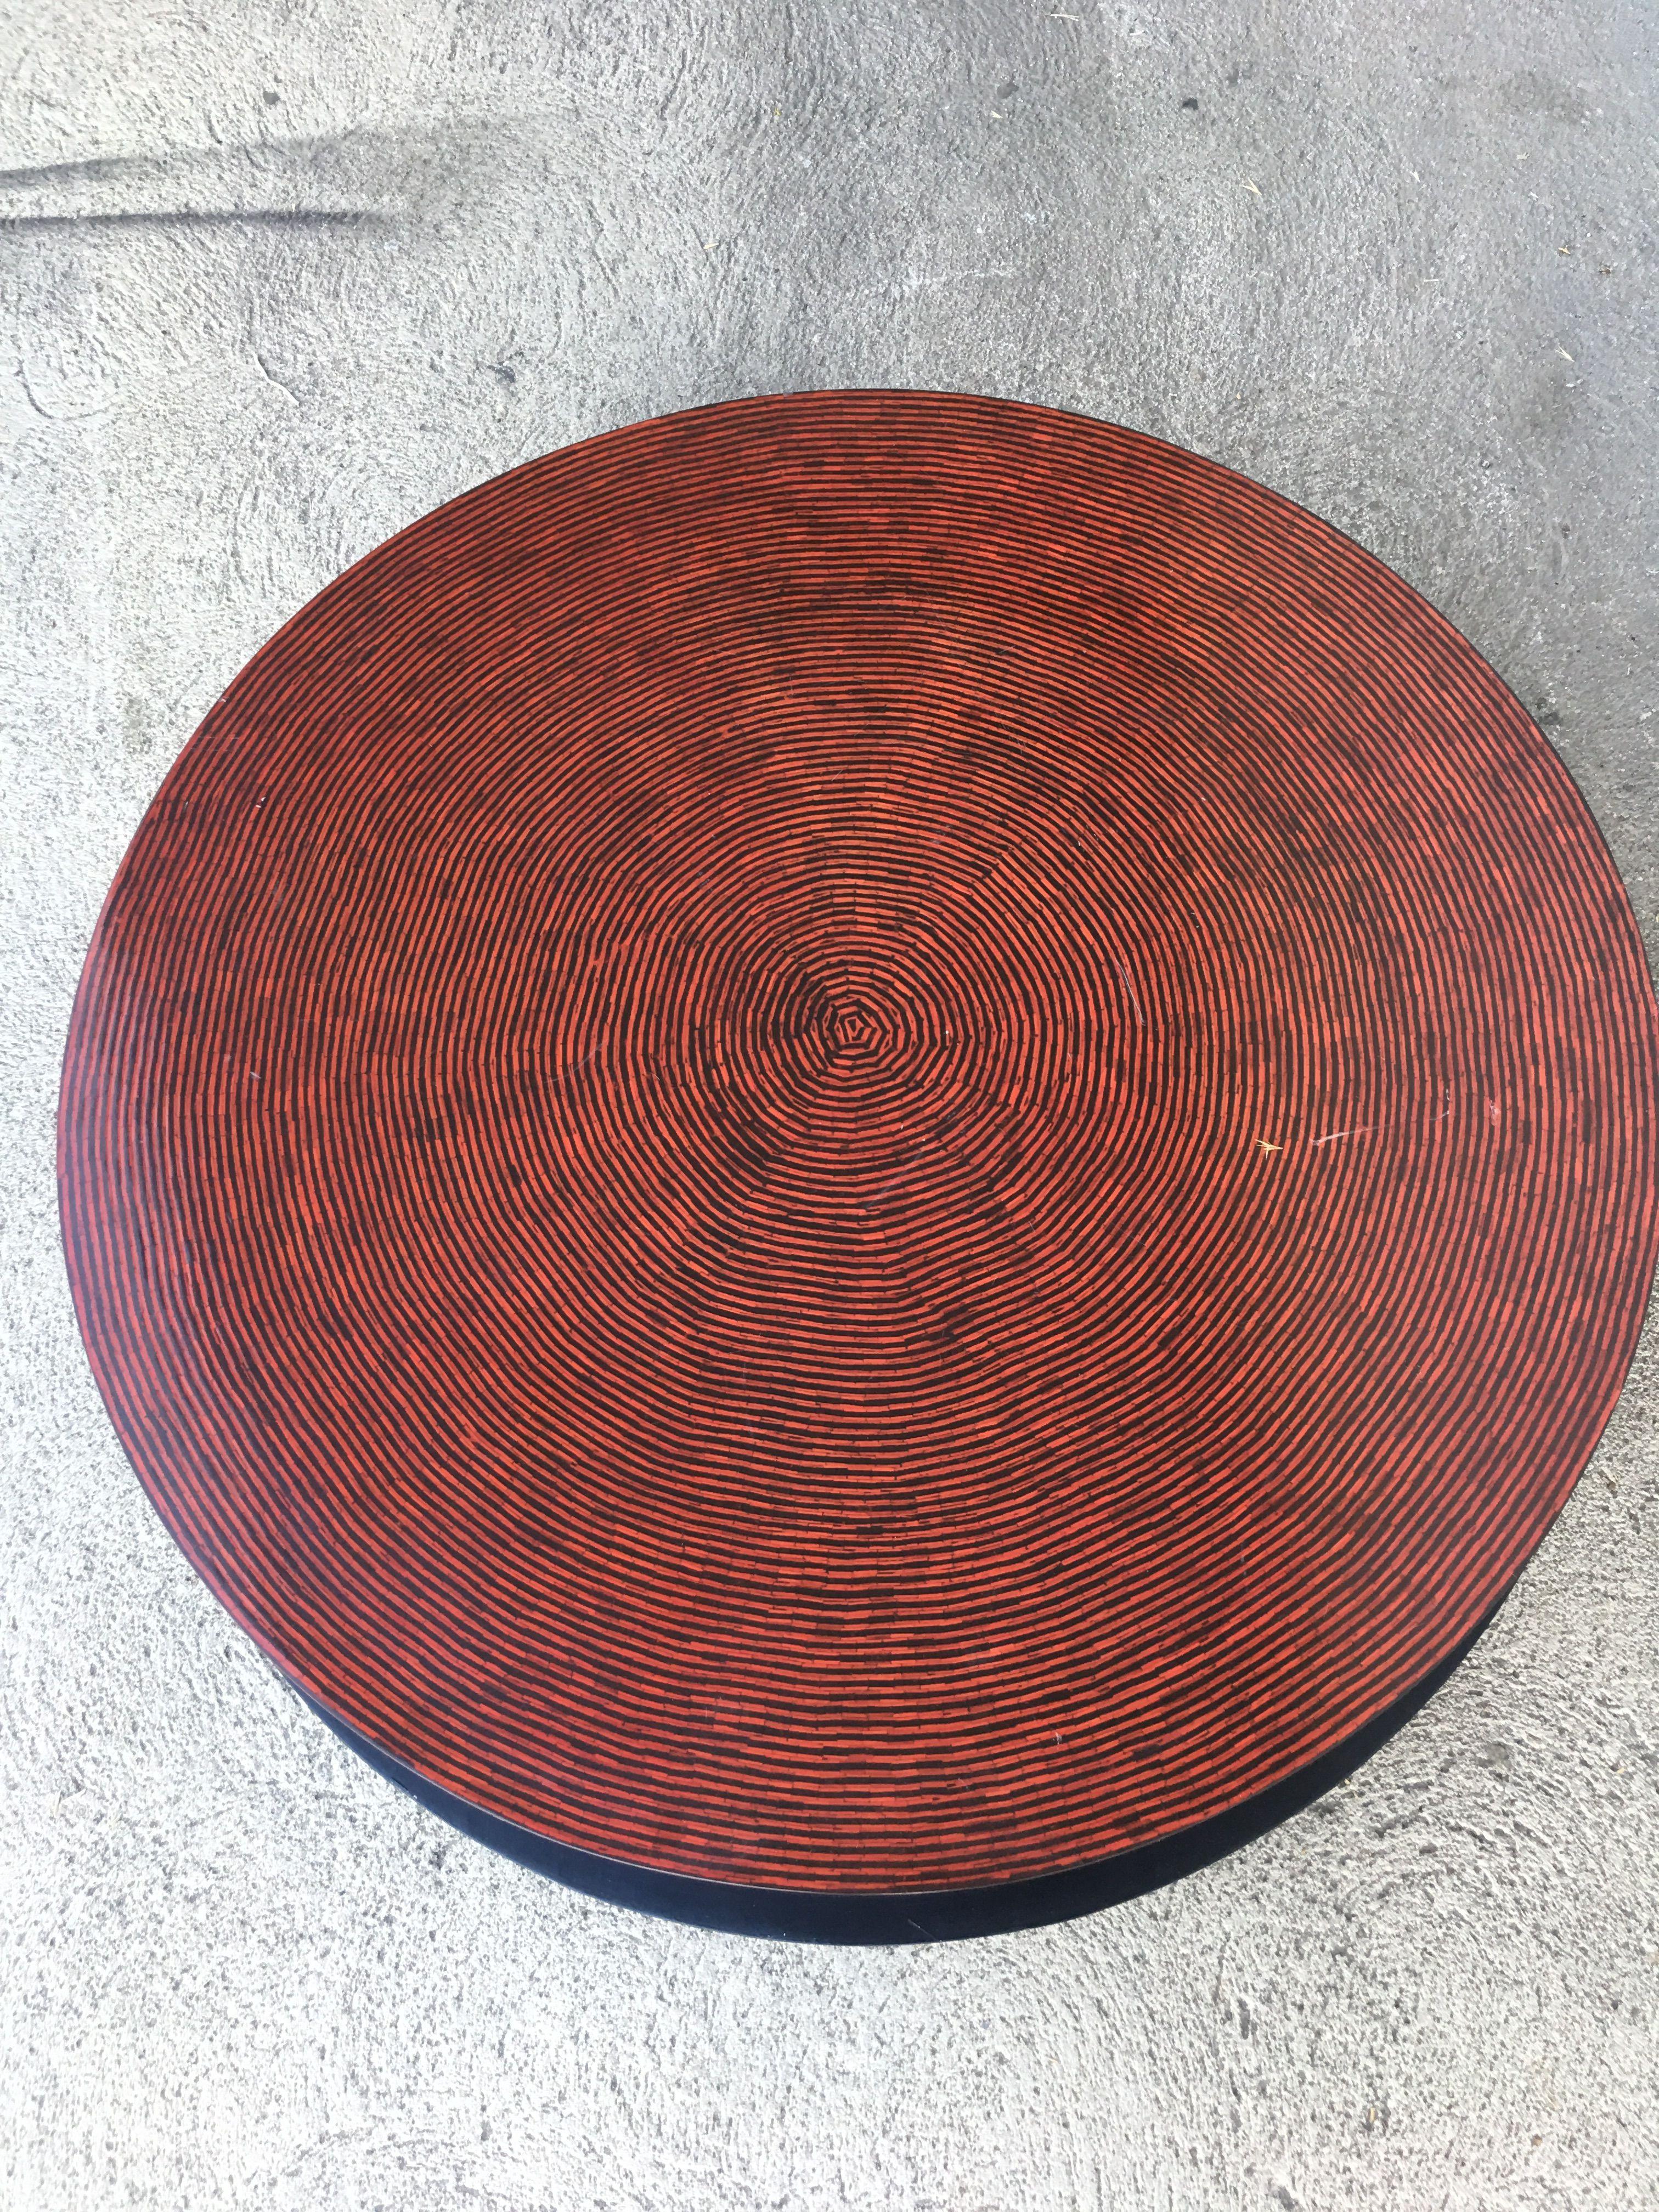 Two-tone Cubist Style round Coffee/Cocktail table with black base and red textured vinyl top. Matching side tables available search 